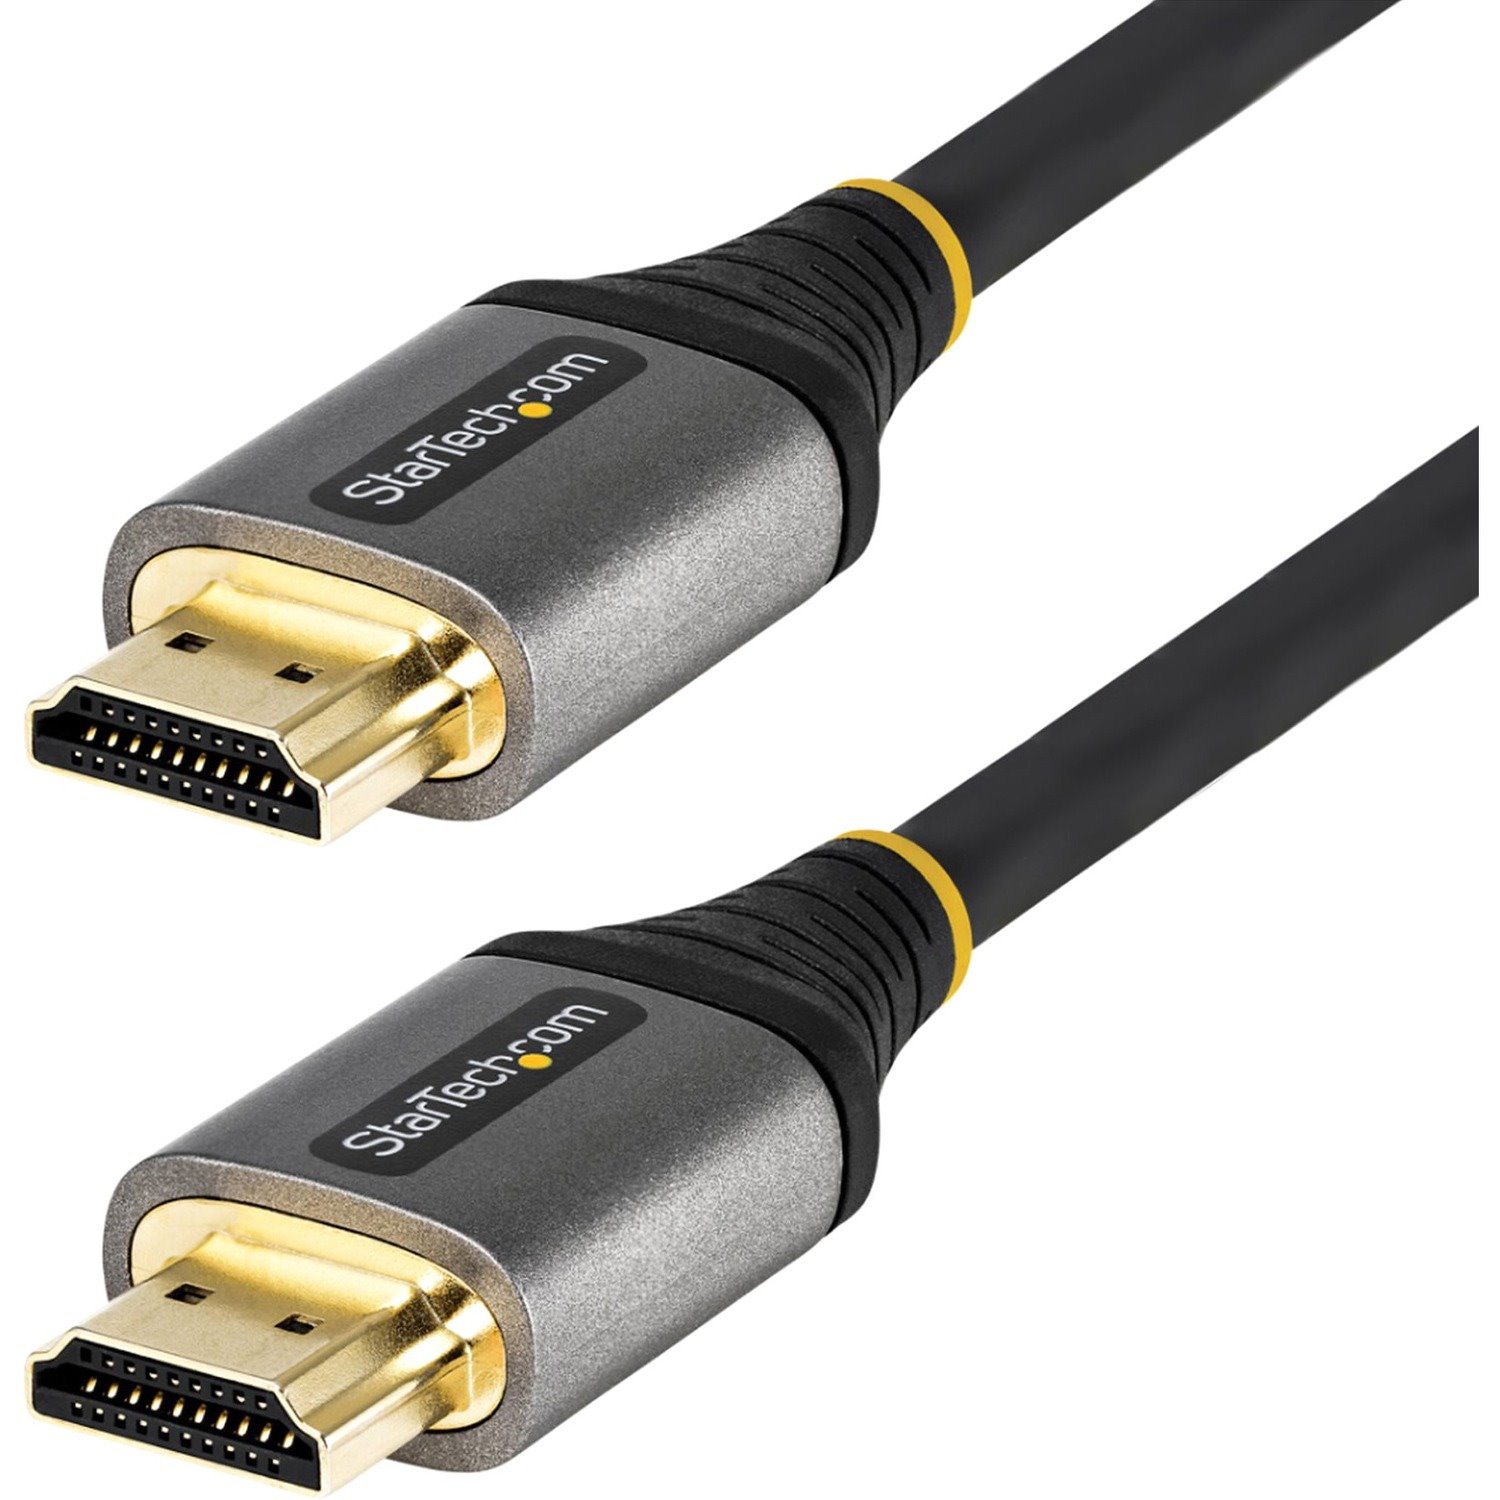 StarTech.com Premium 91.44 cm HDMI A/V Cable for Audio/Video Device, Monitor, TV, Home Theater System - 1 Piece